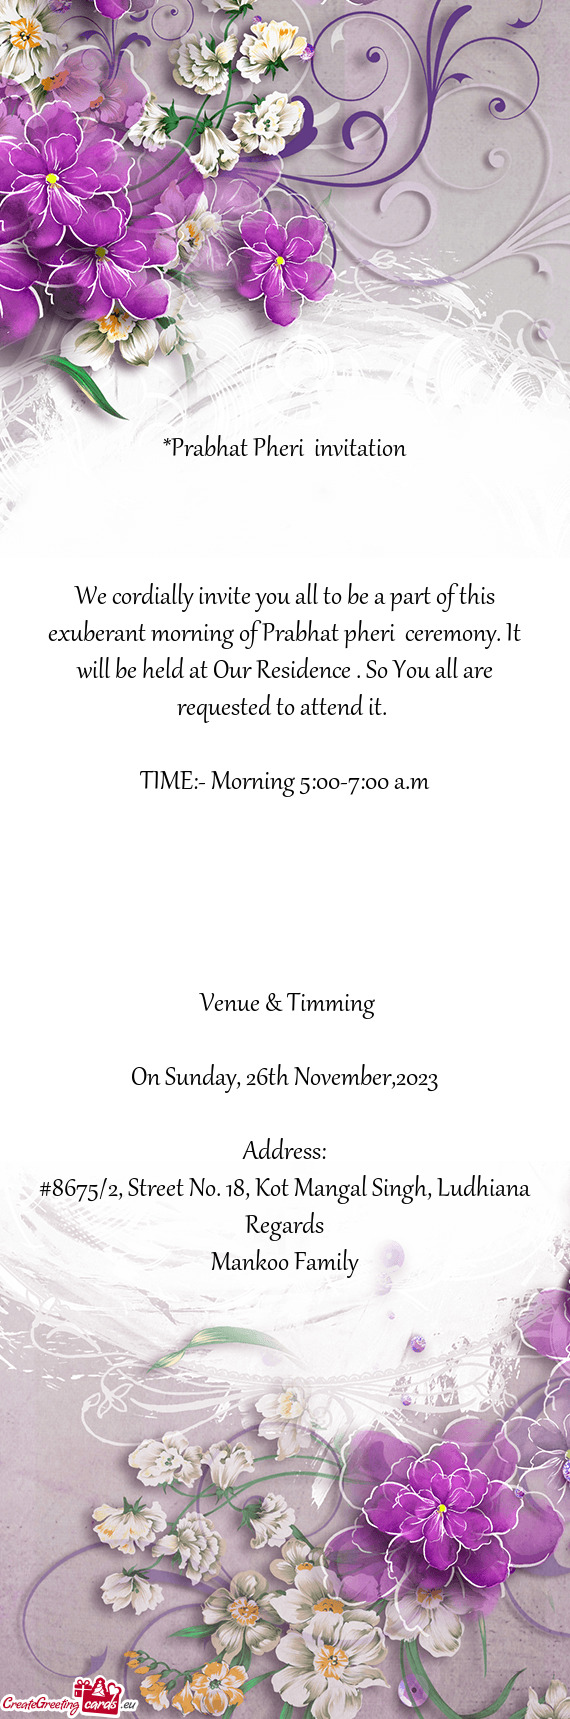 We cordially invite you all to be a part of this exuberant morning of Prabhat pheri ceremony. It wi